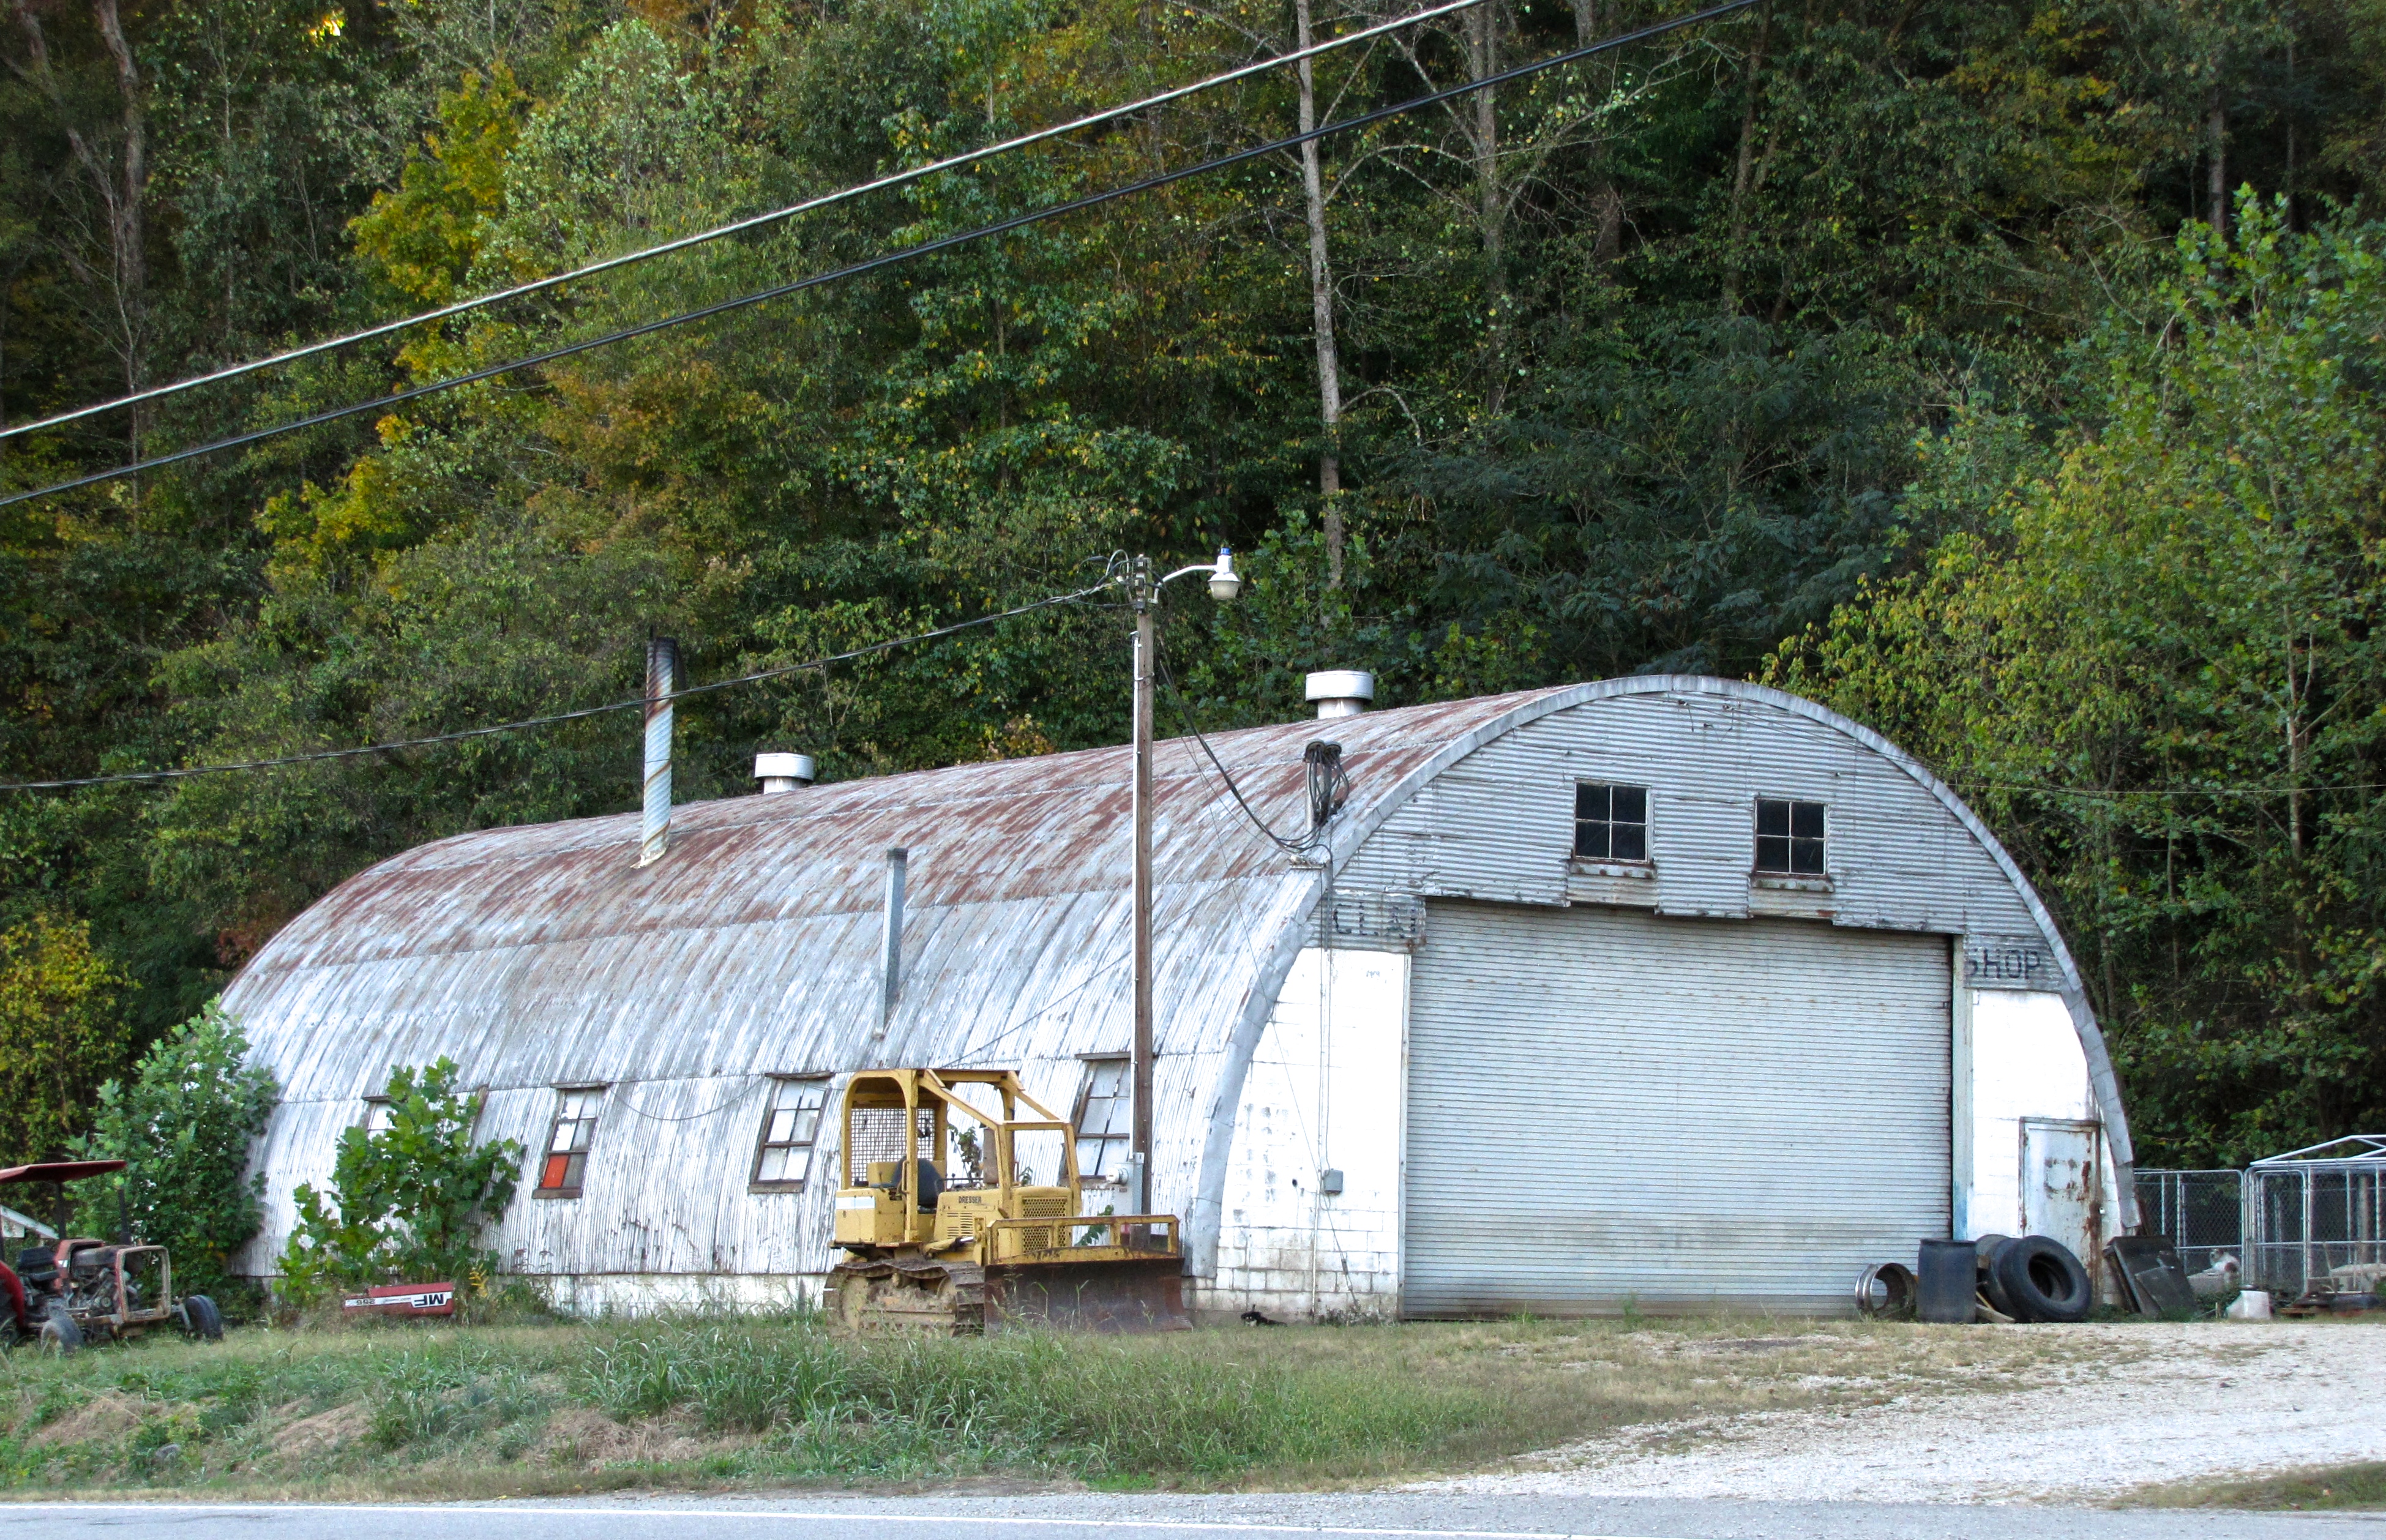 quonset hut in Jamison, PA